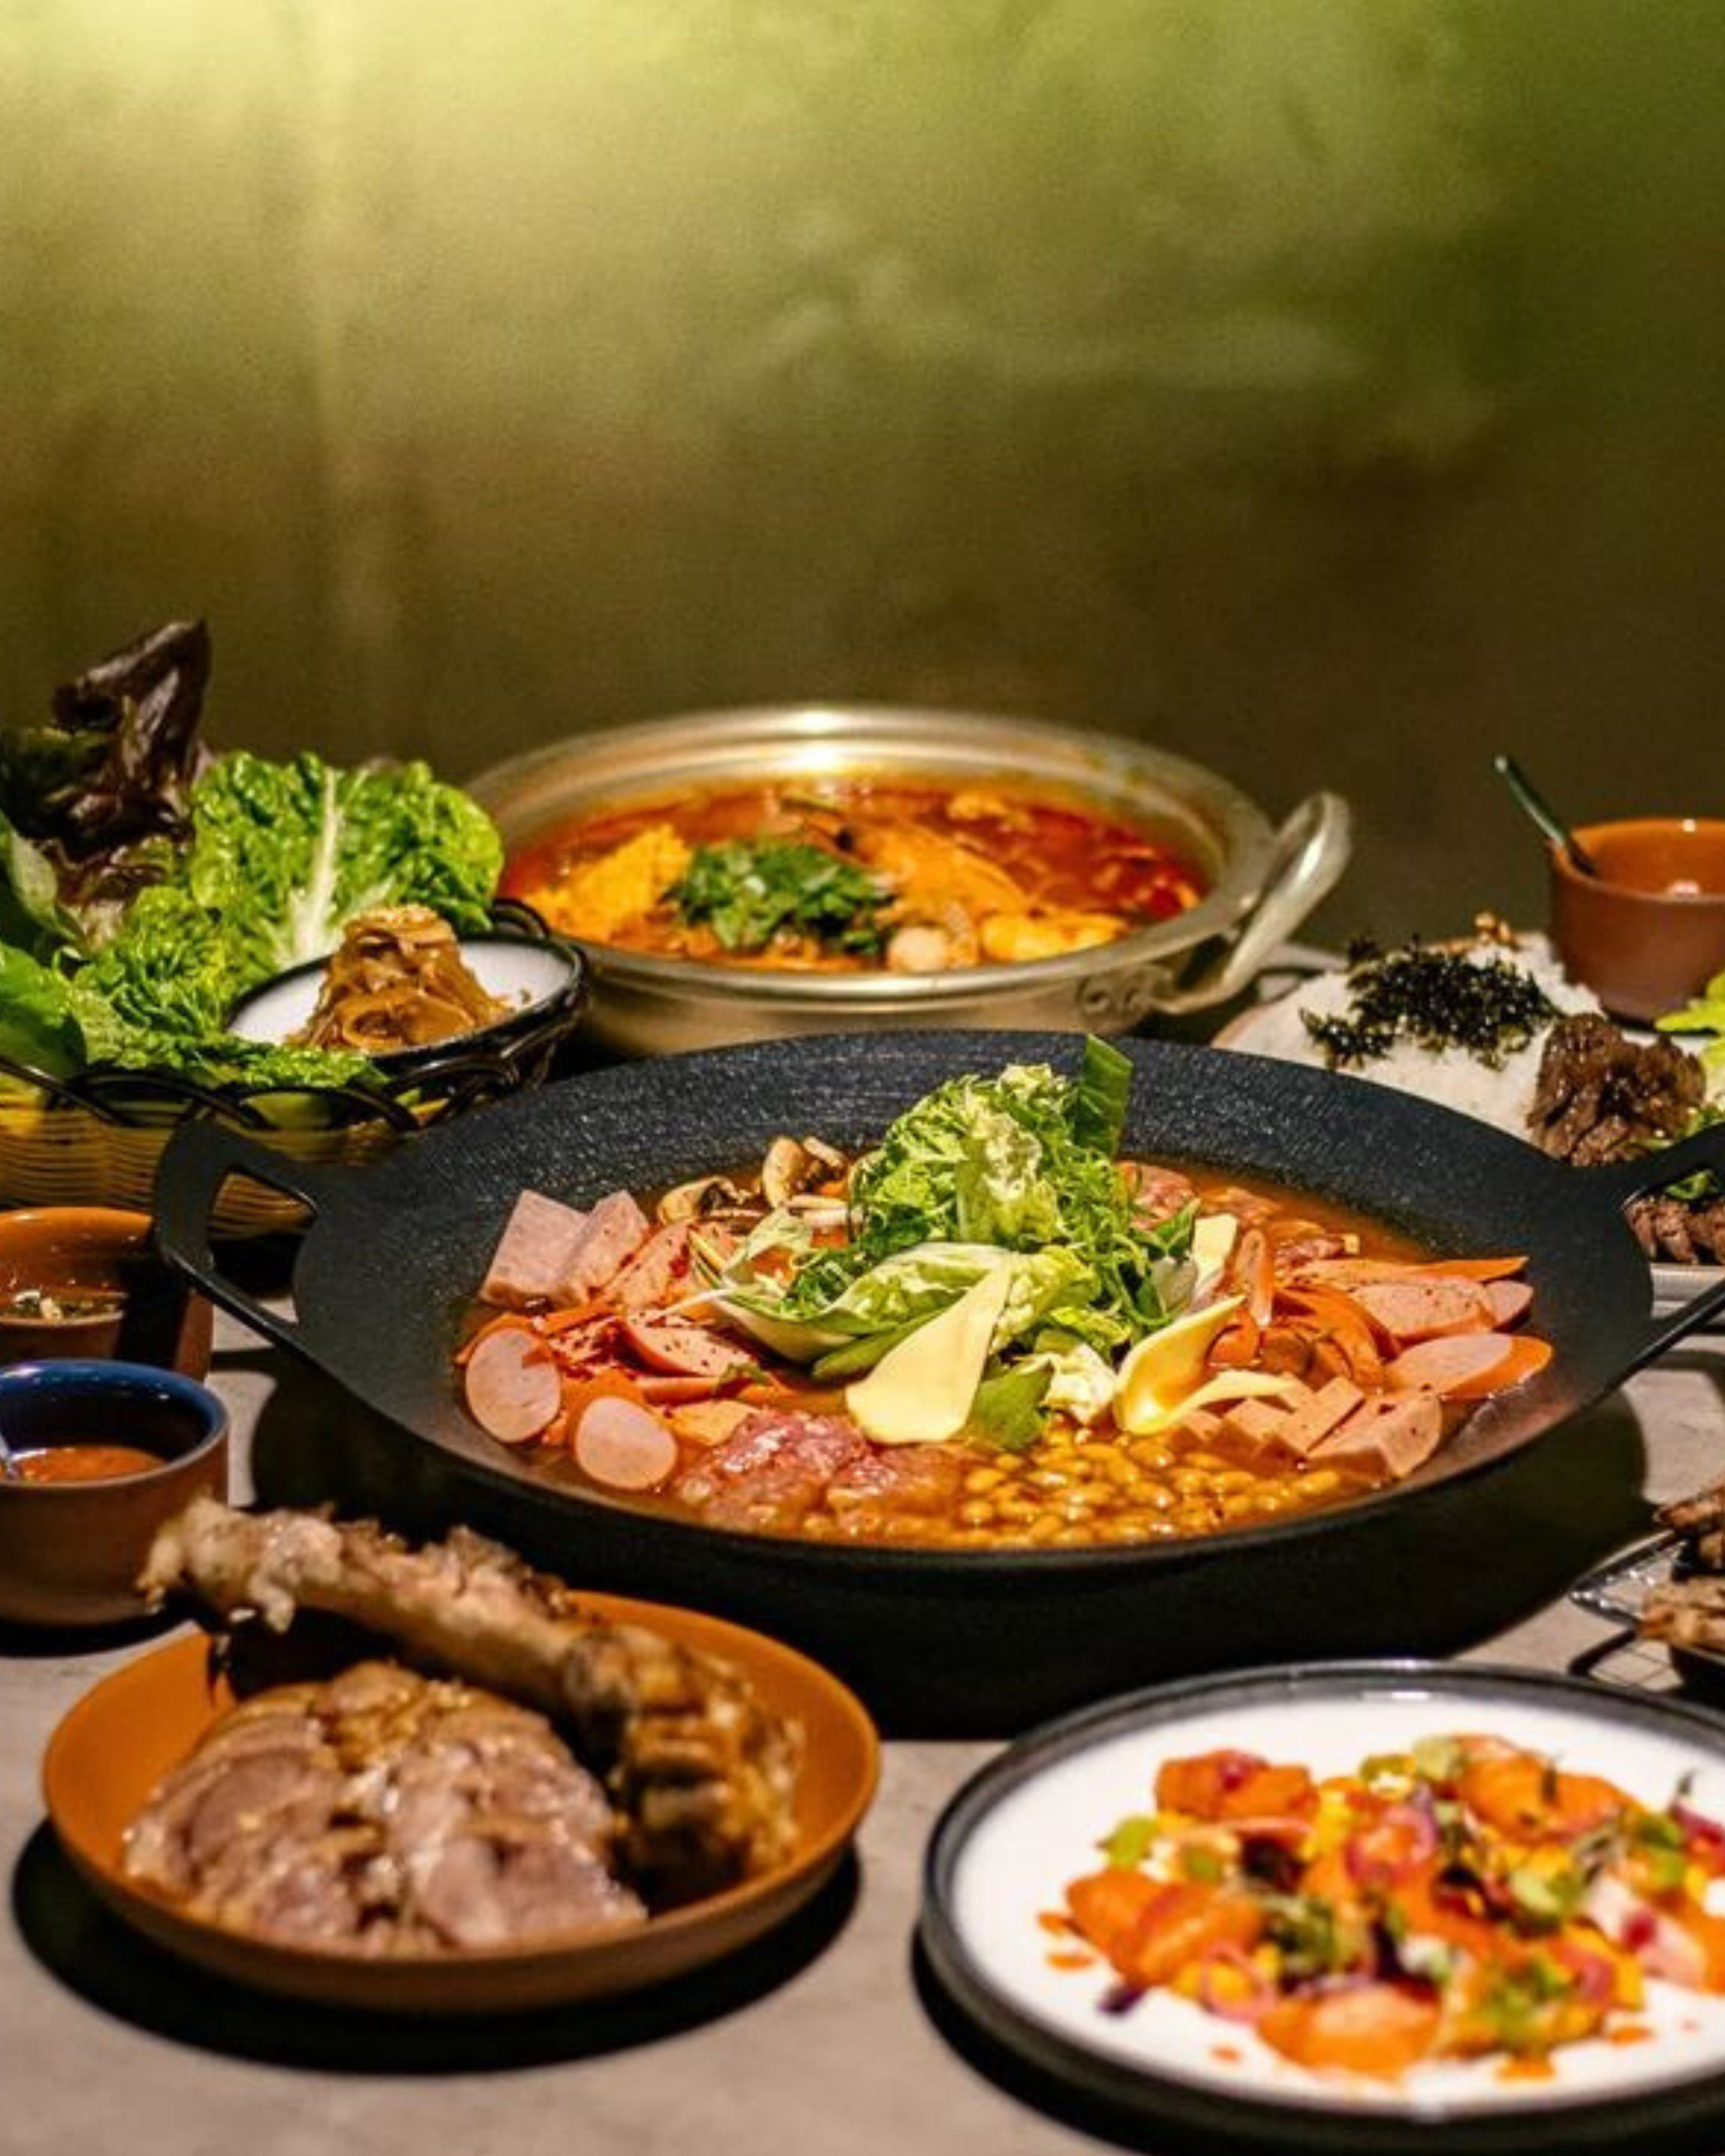 A new hidden Korean eatery has opened in Auckland called Ssam'Jang